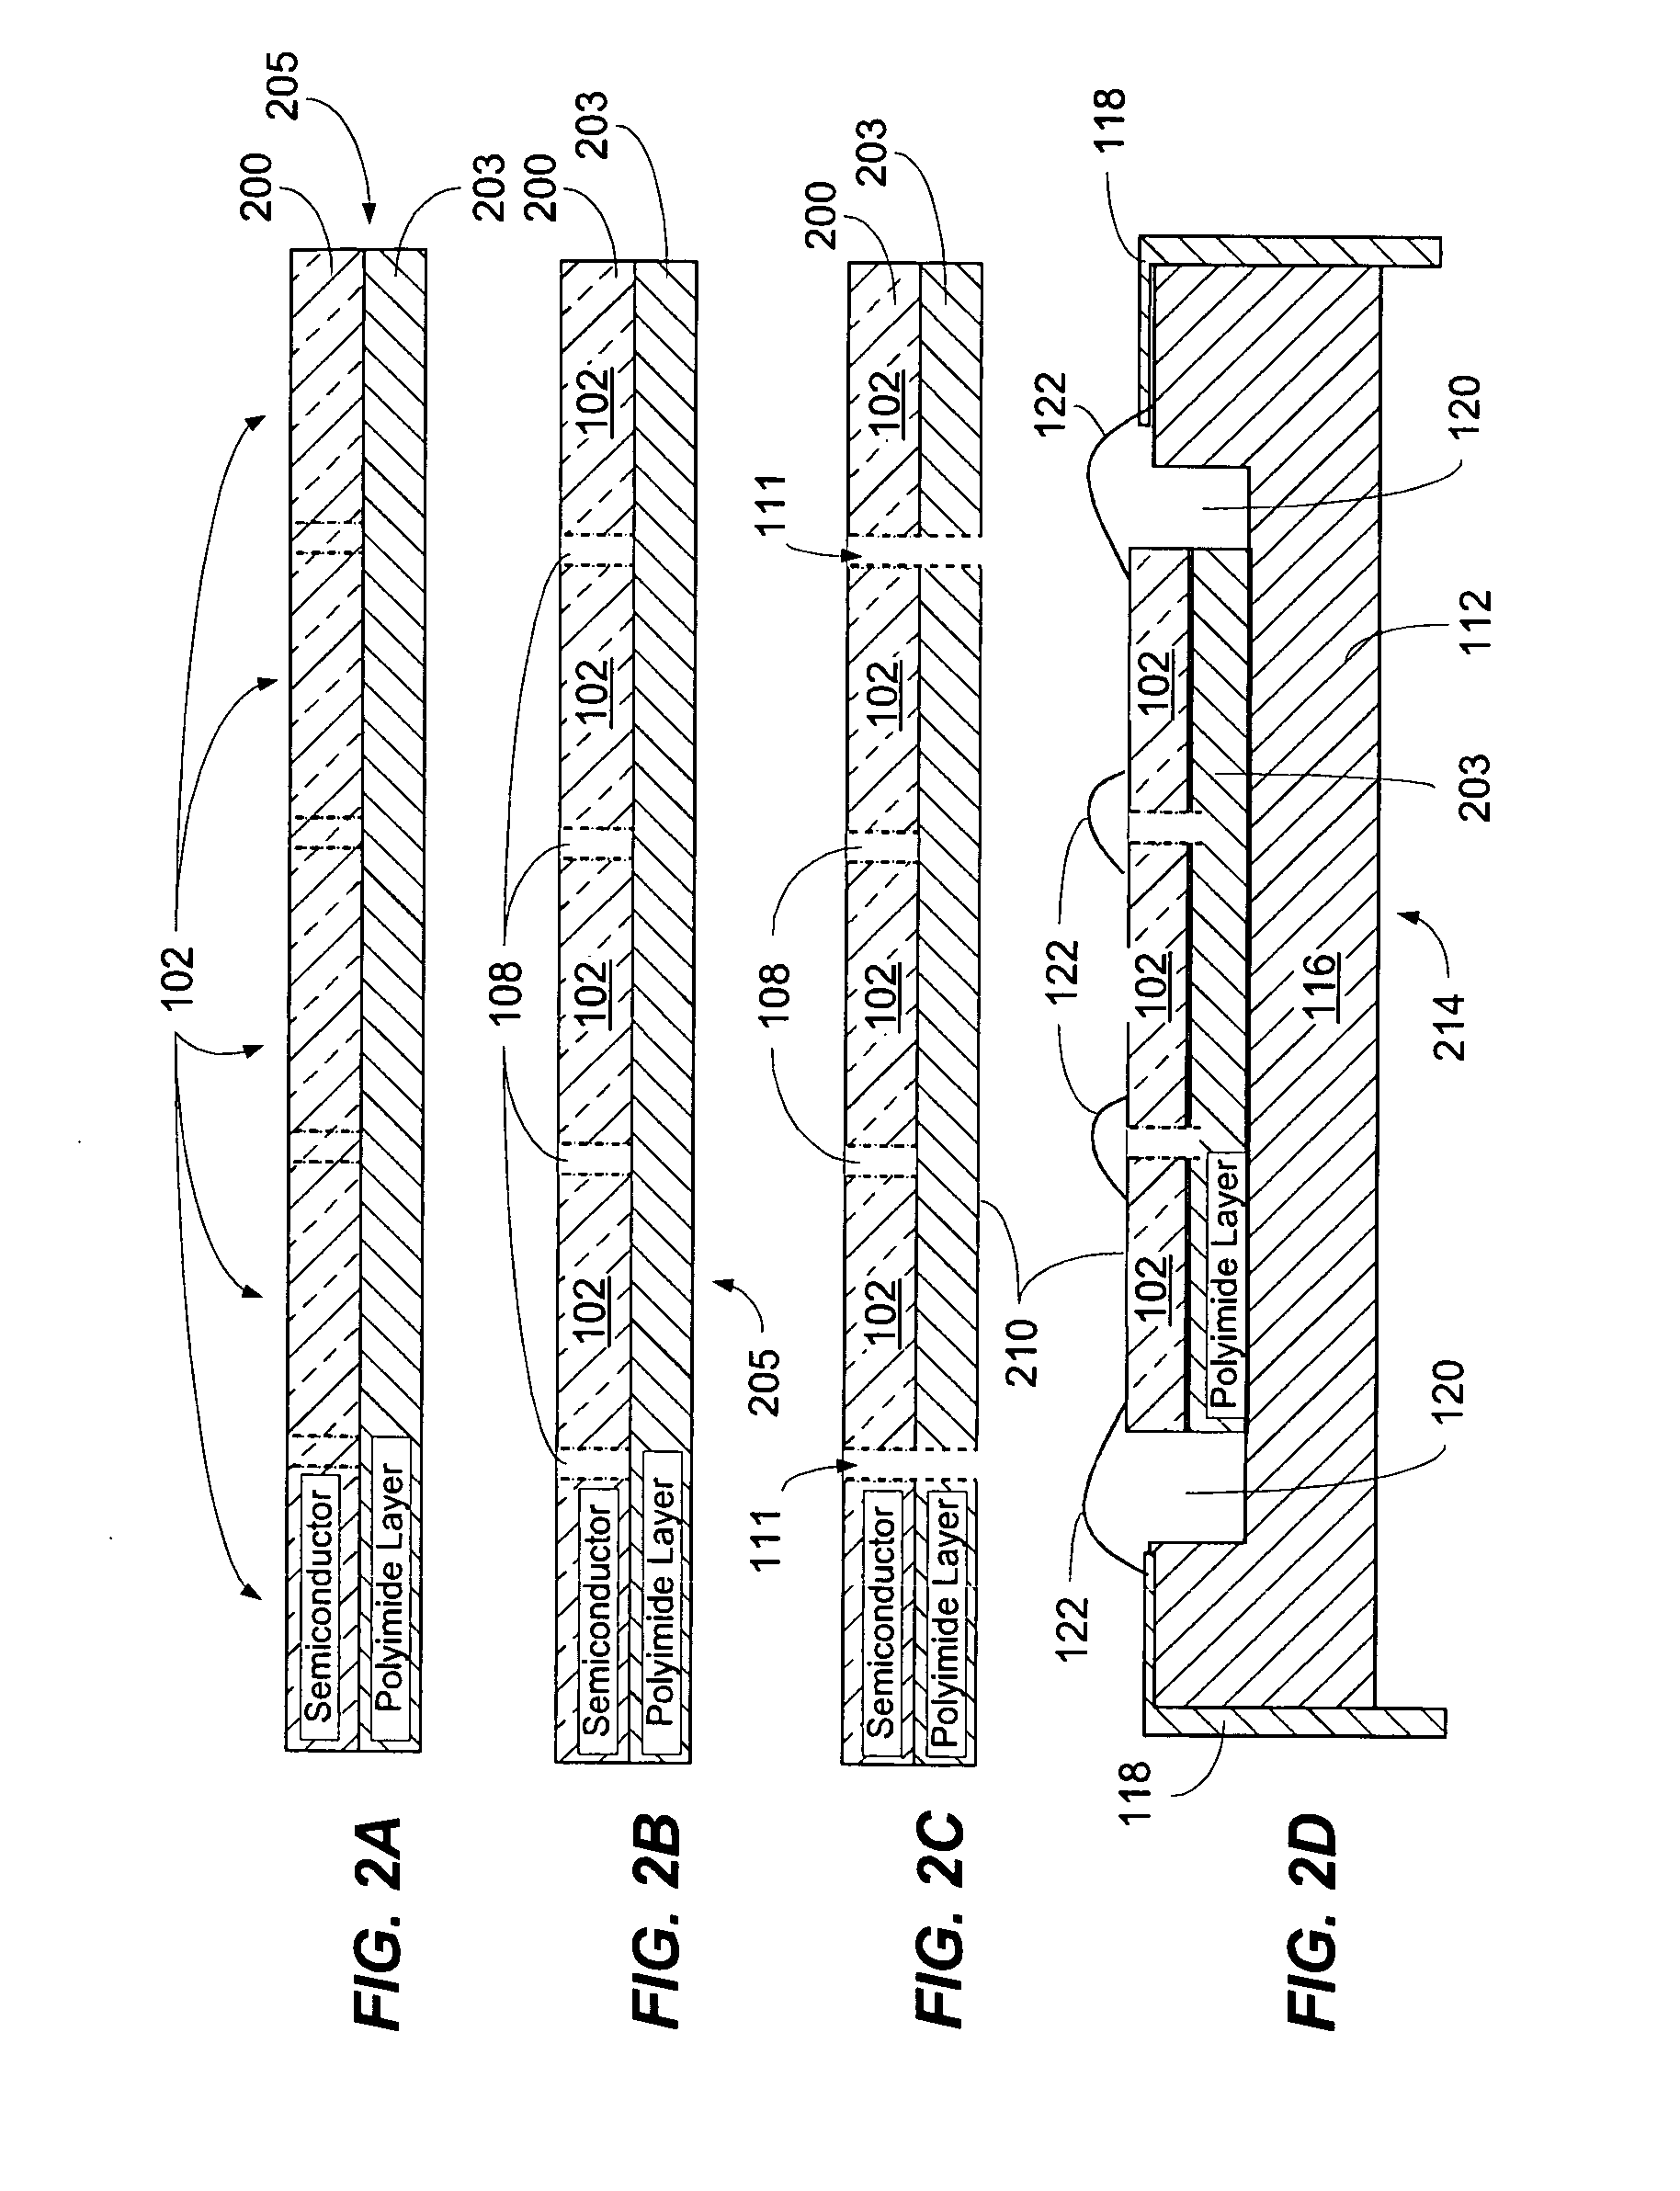 Processes and packaging for high voltage integrated circuits, electronic devices, and circuits